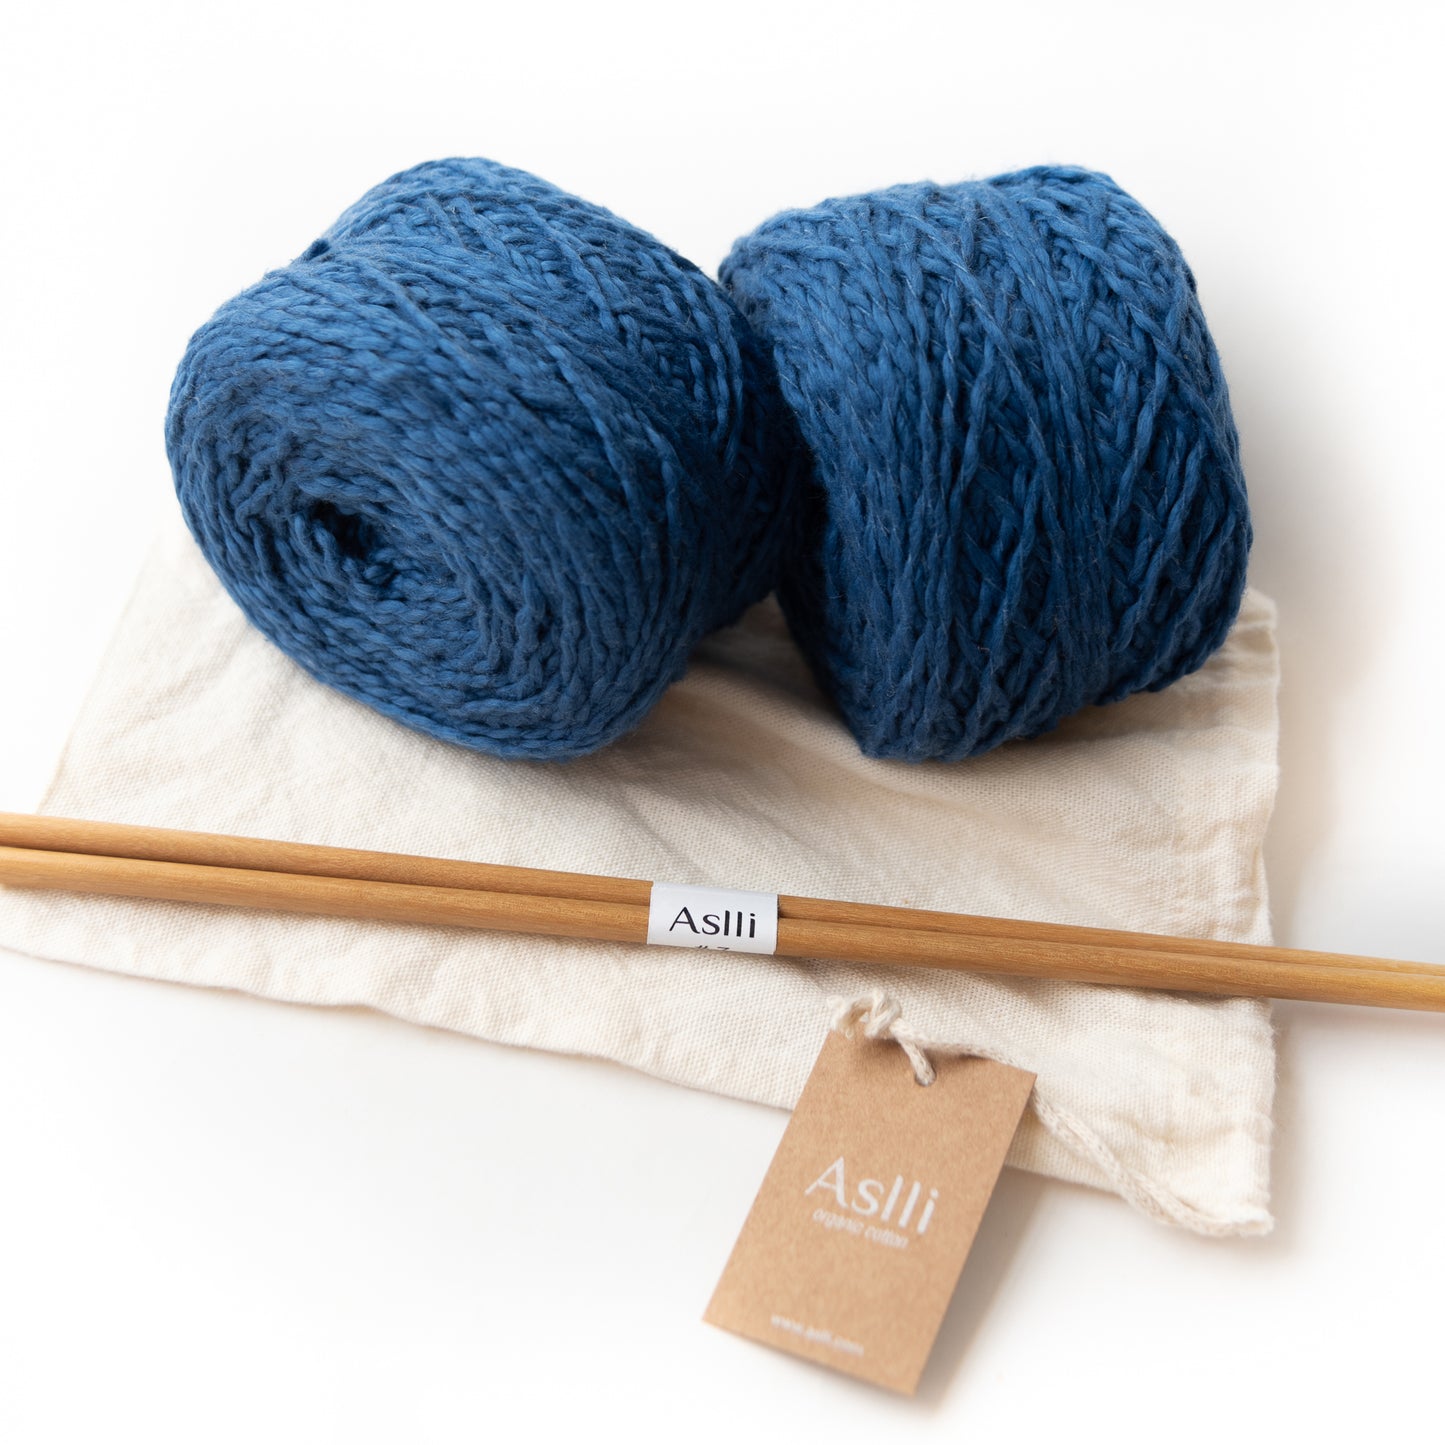 Kit with Knitting sticks and 200gr of organic cotton yarn